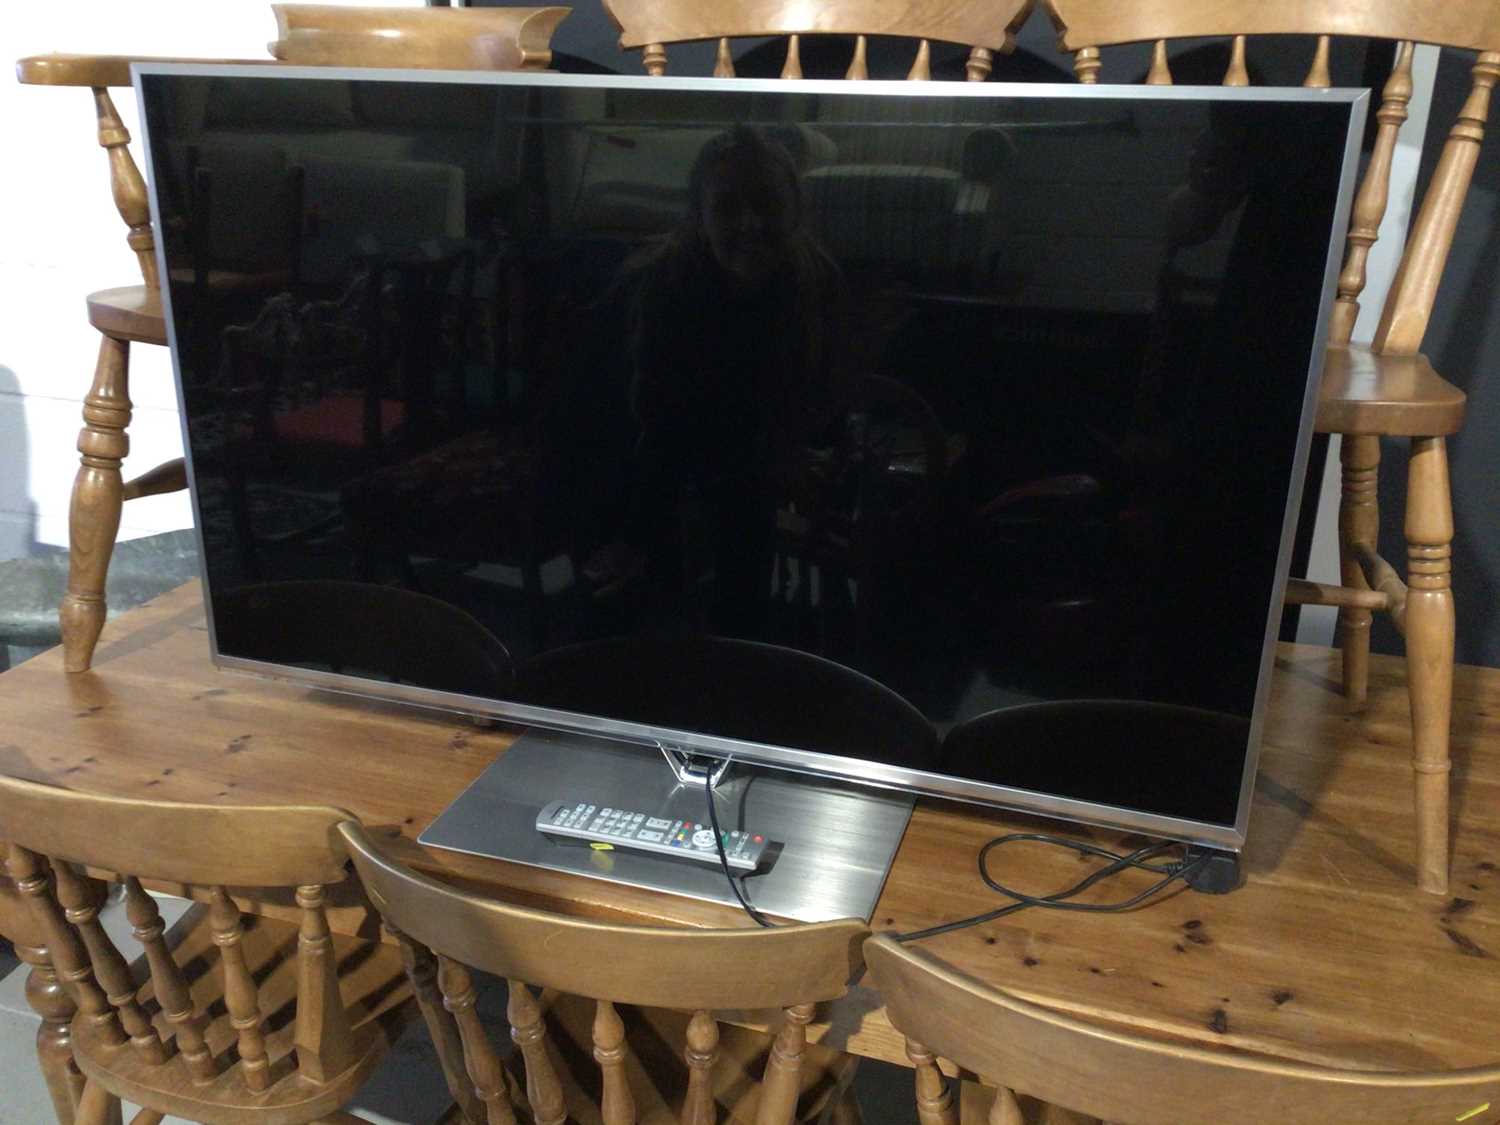 Lot 86 - Panasonic flatscreen television model number TX-L47FT60B with remote control